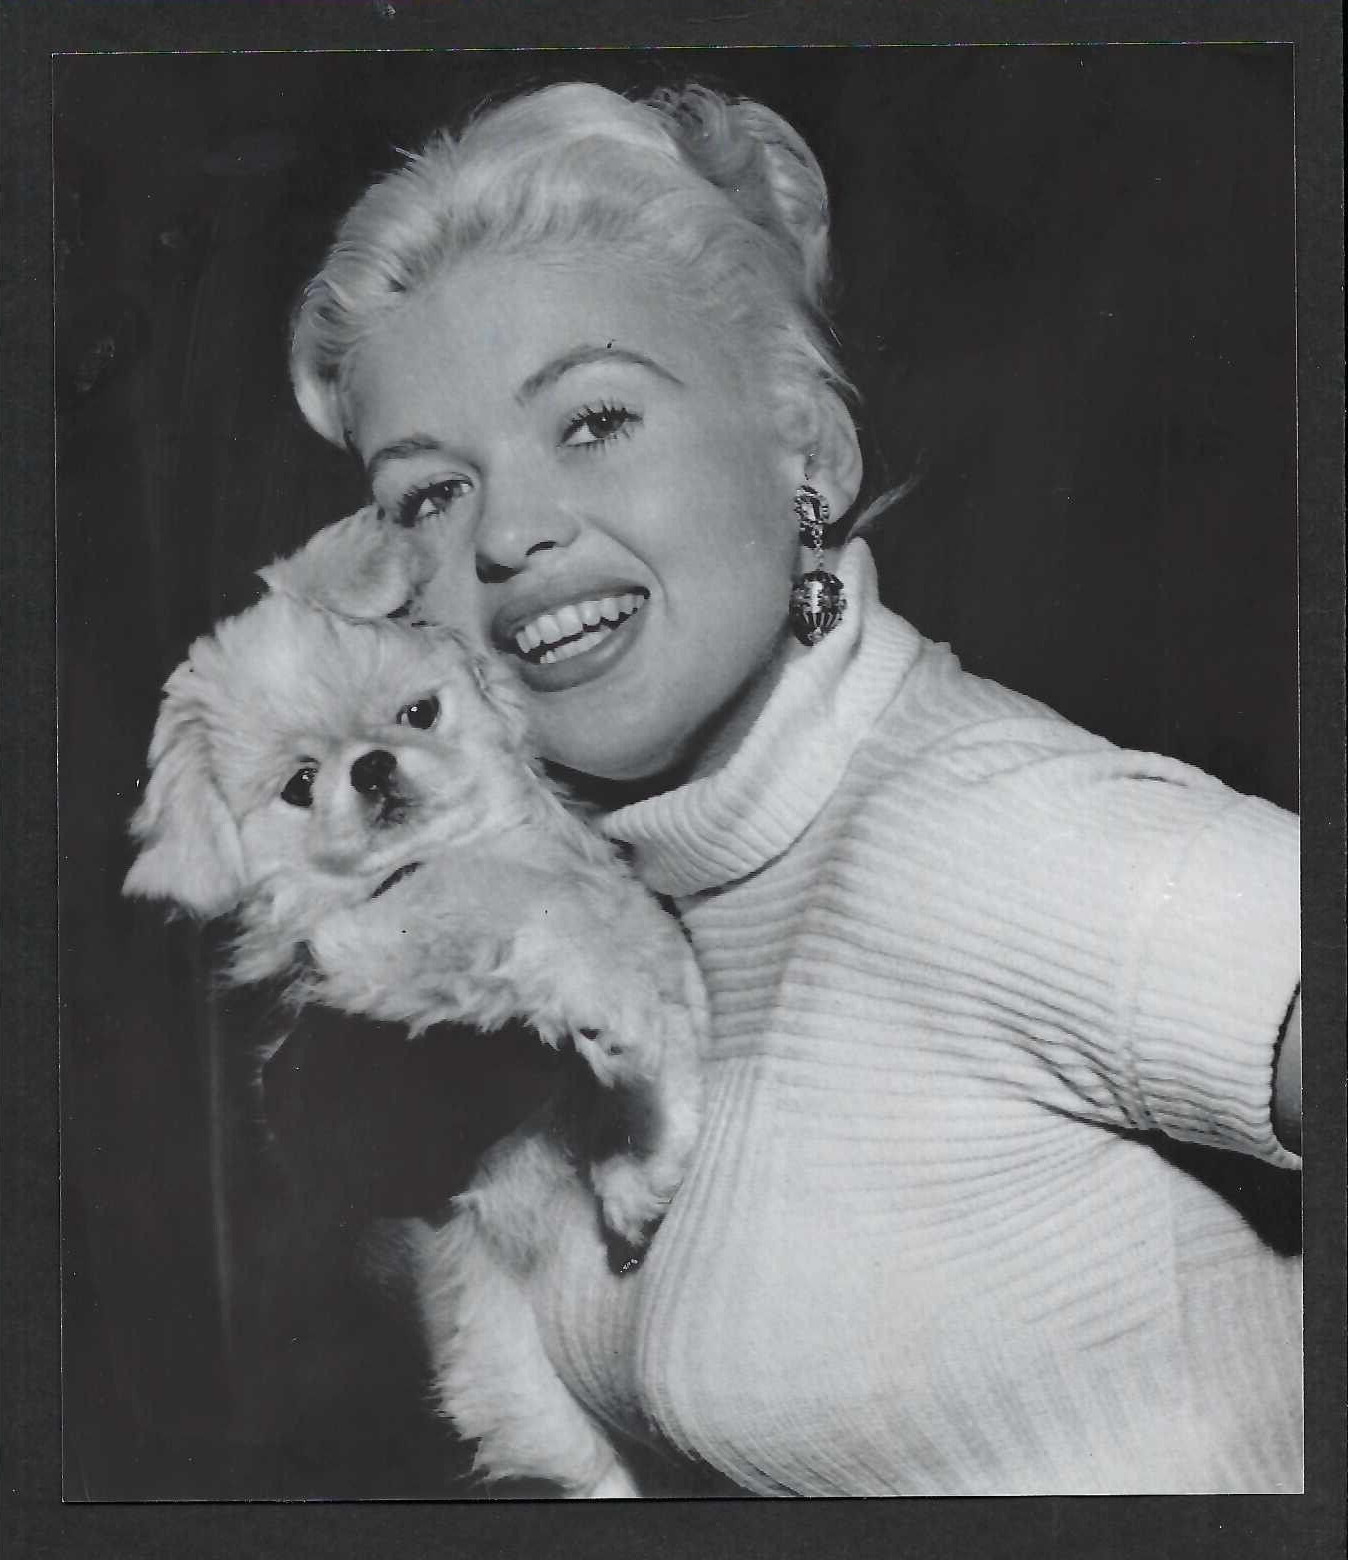 JAYNE MANSFIELD ACTRESS POSES WITH HER DOG VTG 1957 ORIG PHOTO